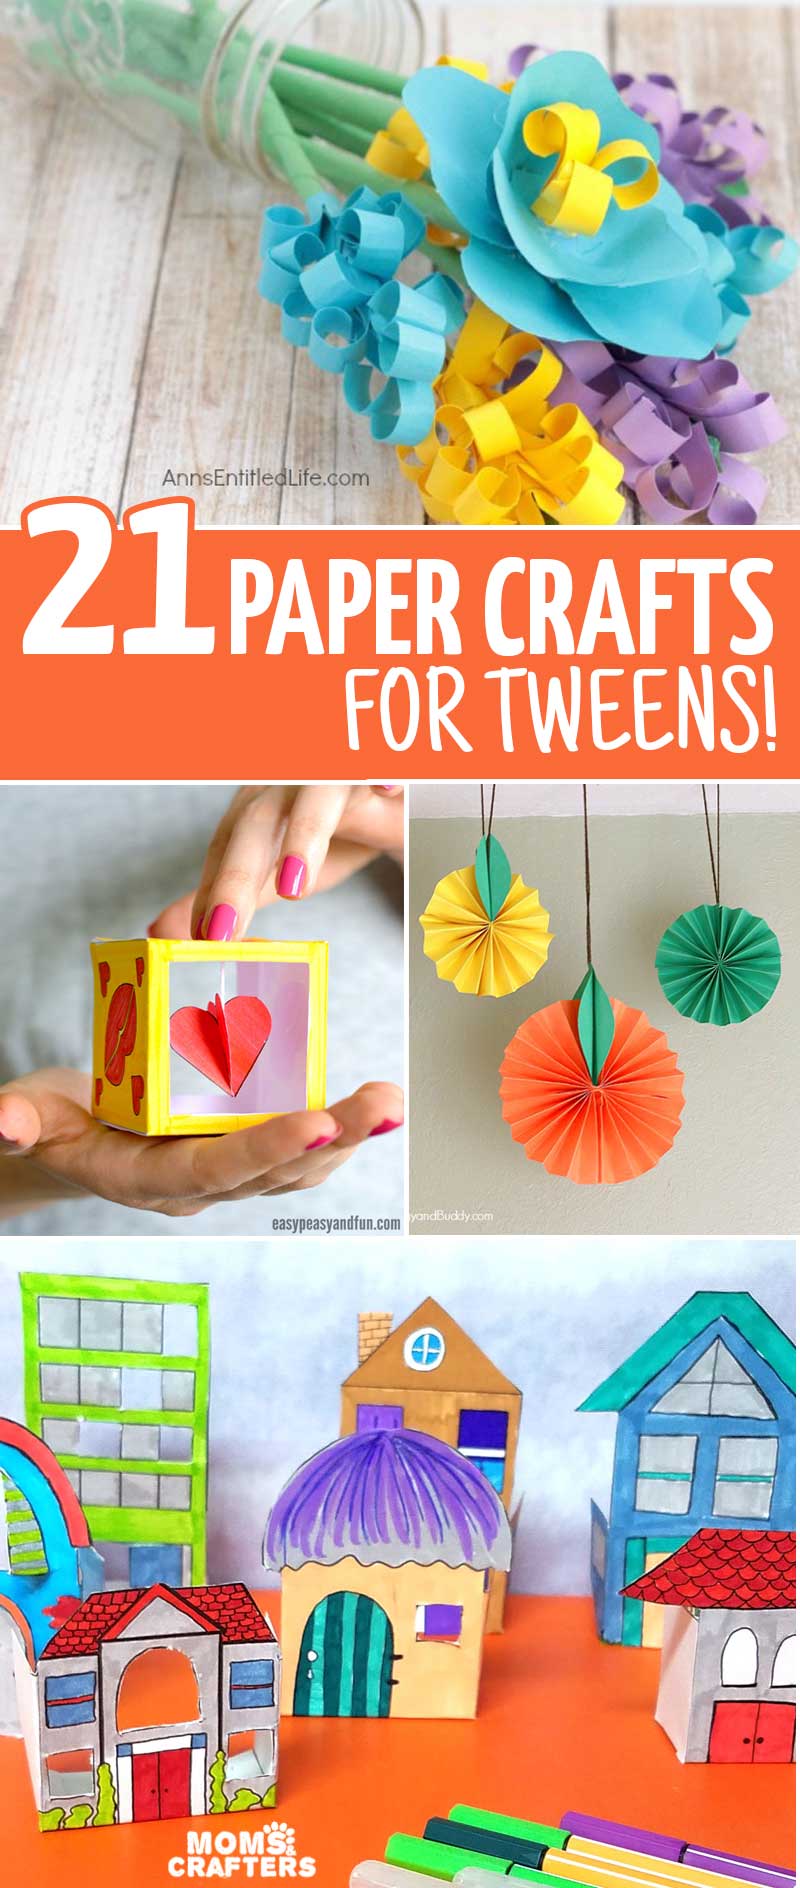 5 Cool Paper Crafts Ideas for Kids